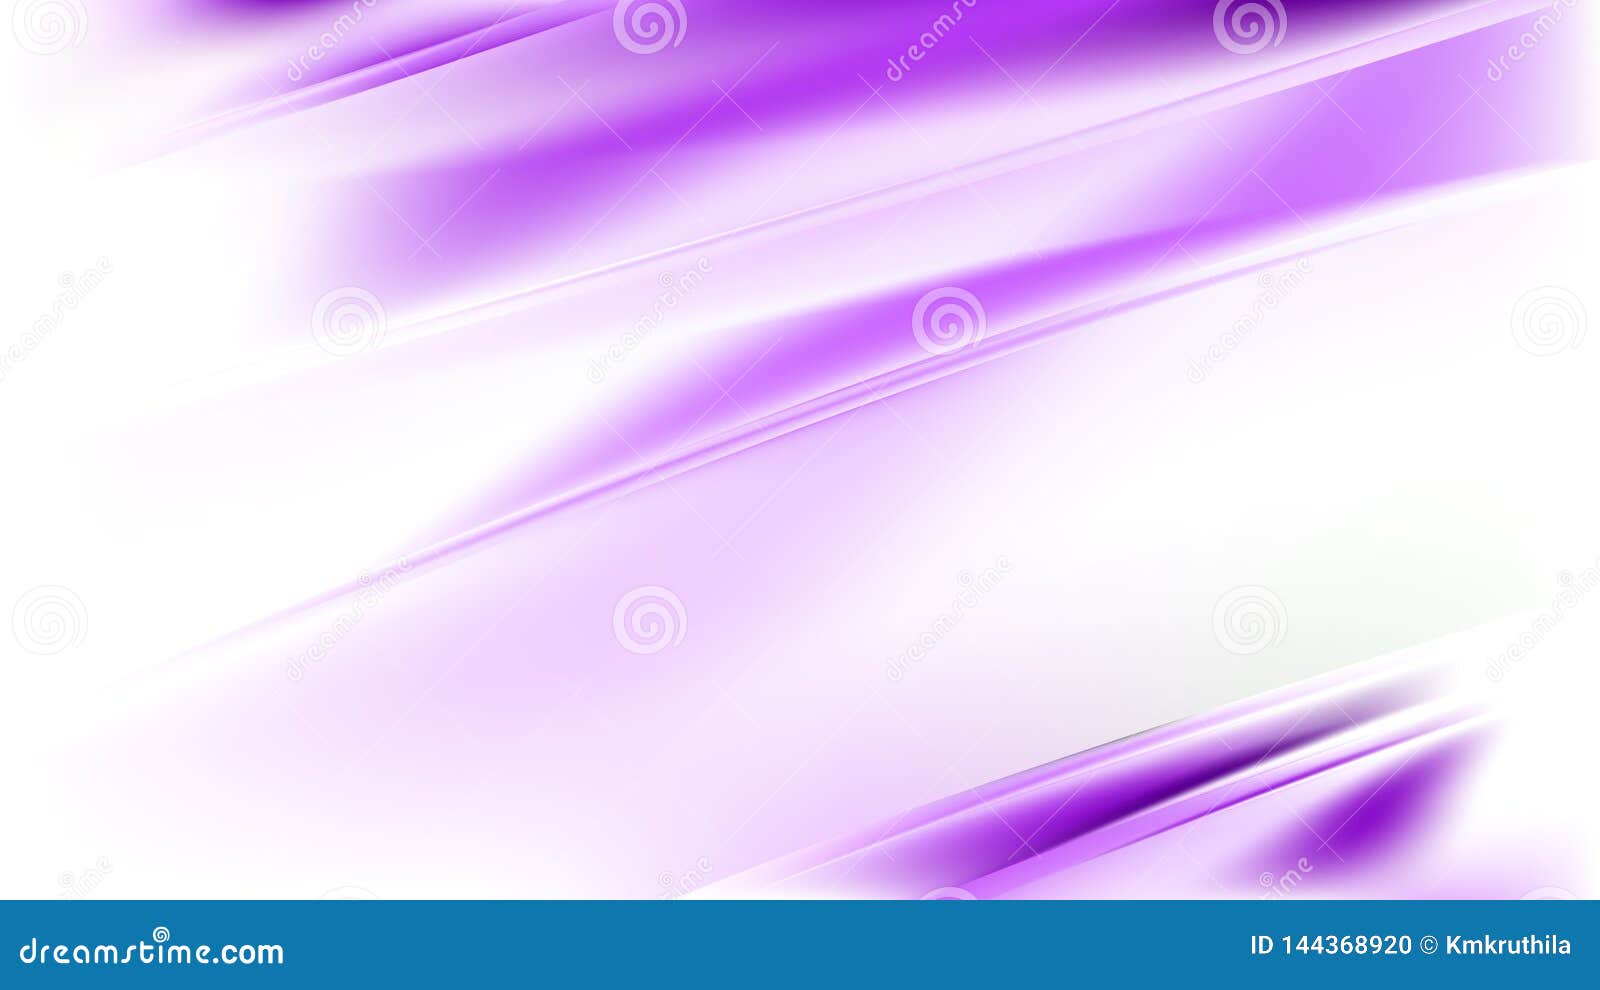 Abstract Purple and White Diagonal Shiny Lines Background Design Template  Stock Illustration - Illustration of design, shiny: 144368920